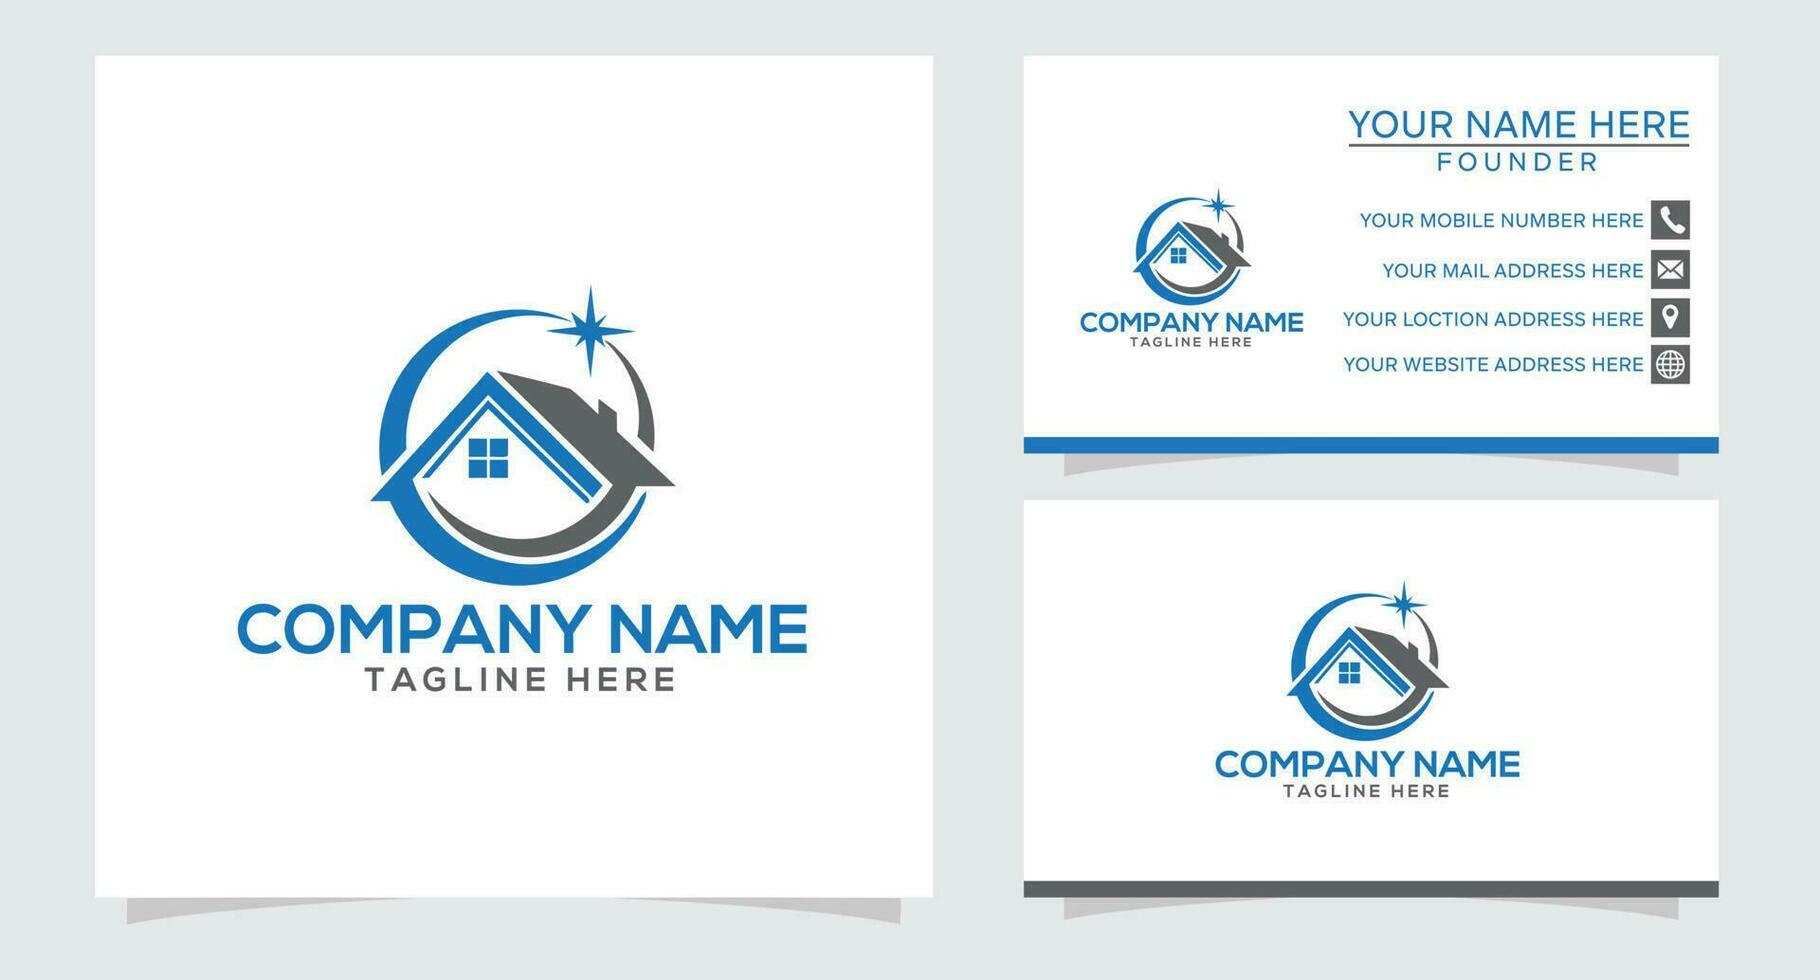 Home and check mark logo - house roof with chimney and window and red tick symbol. Real estate and realty vector icon.